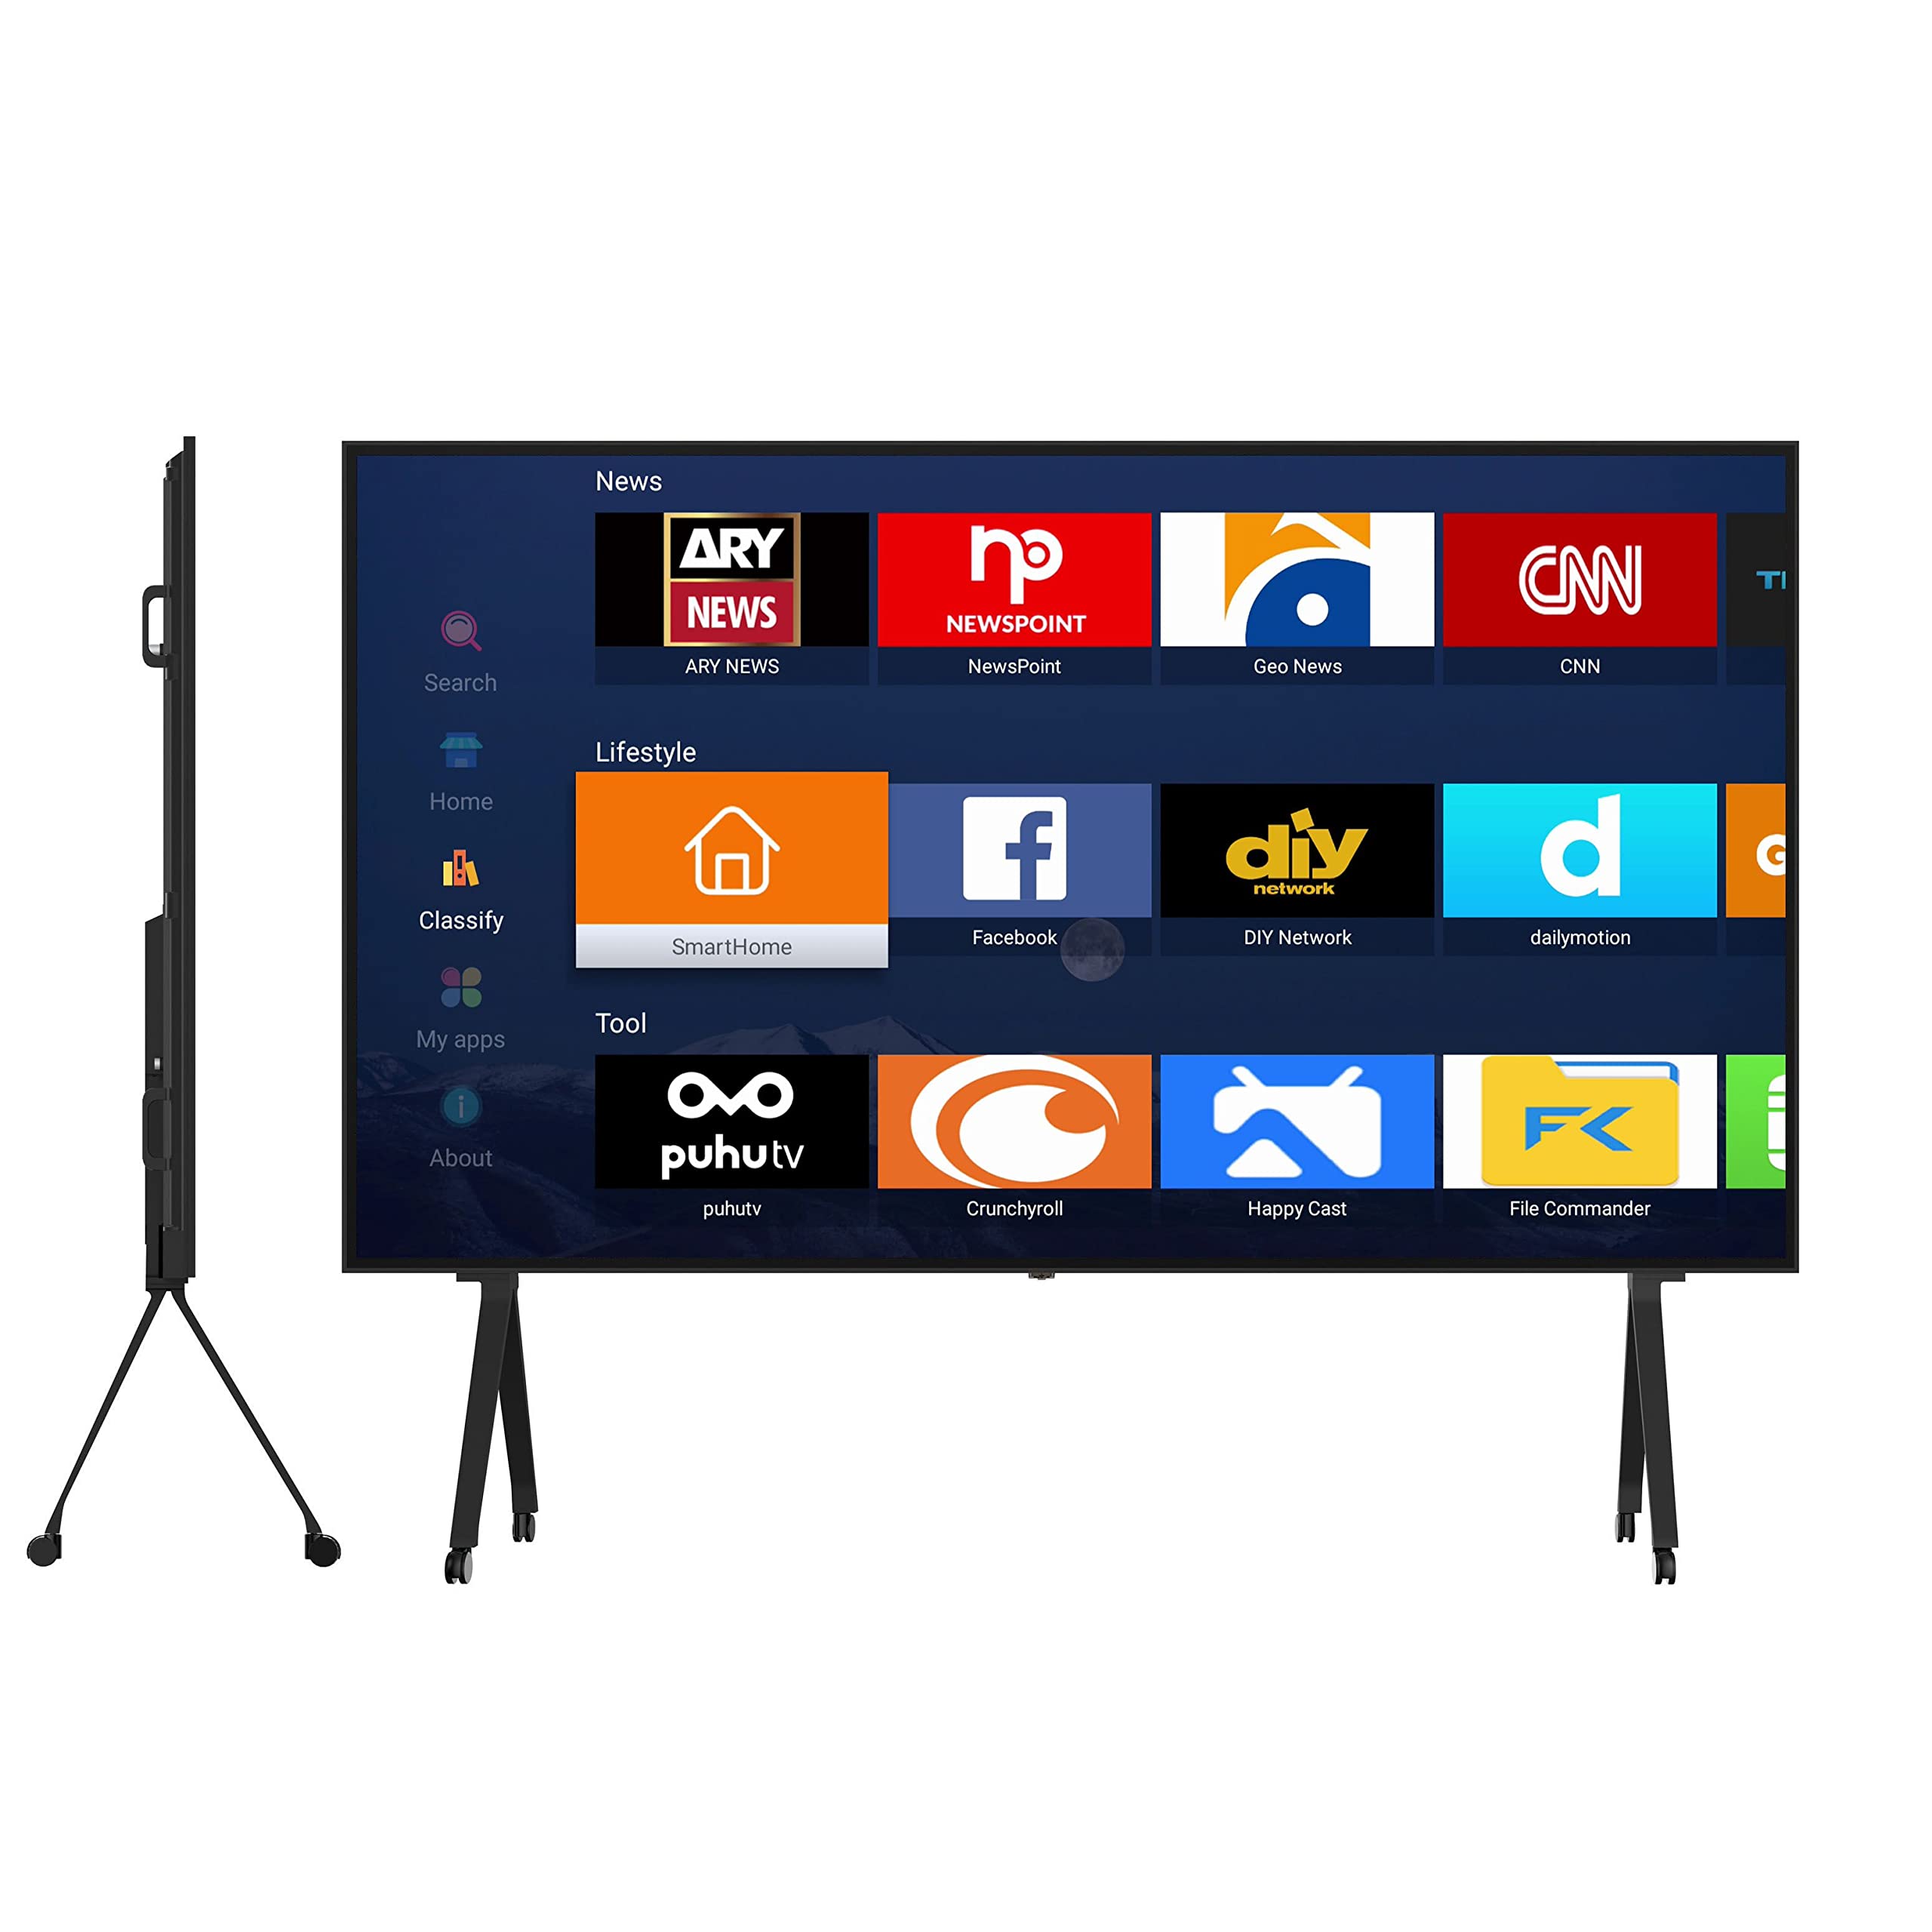 GTUOXIES 100 Inches 4K Ultra HD LED TV Super Screen Stunning Display High Dynamic Range Full Array LED Back Light High Contrast Ratio Local Dimming 100